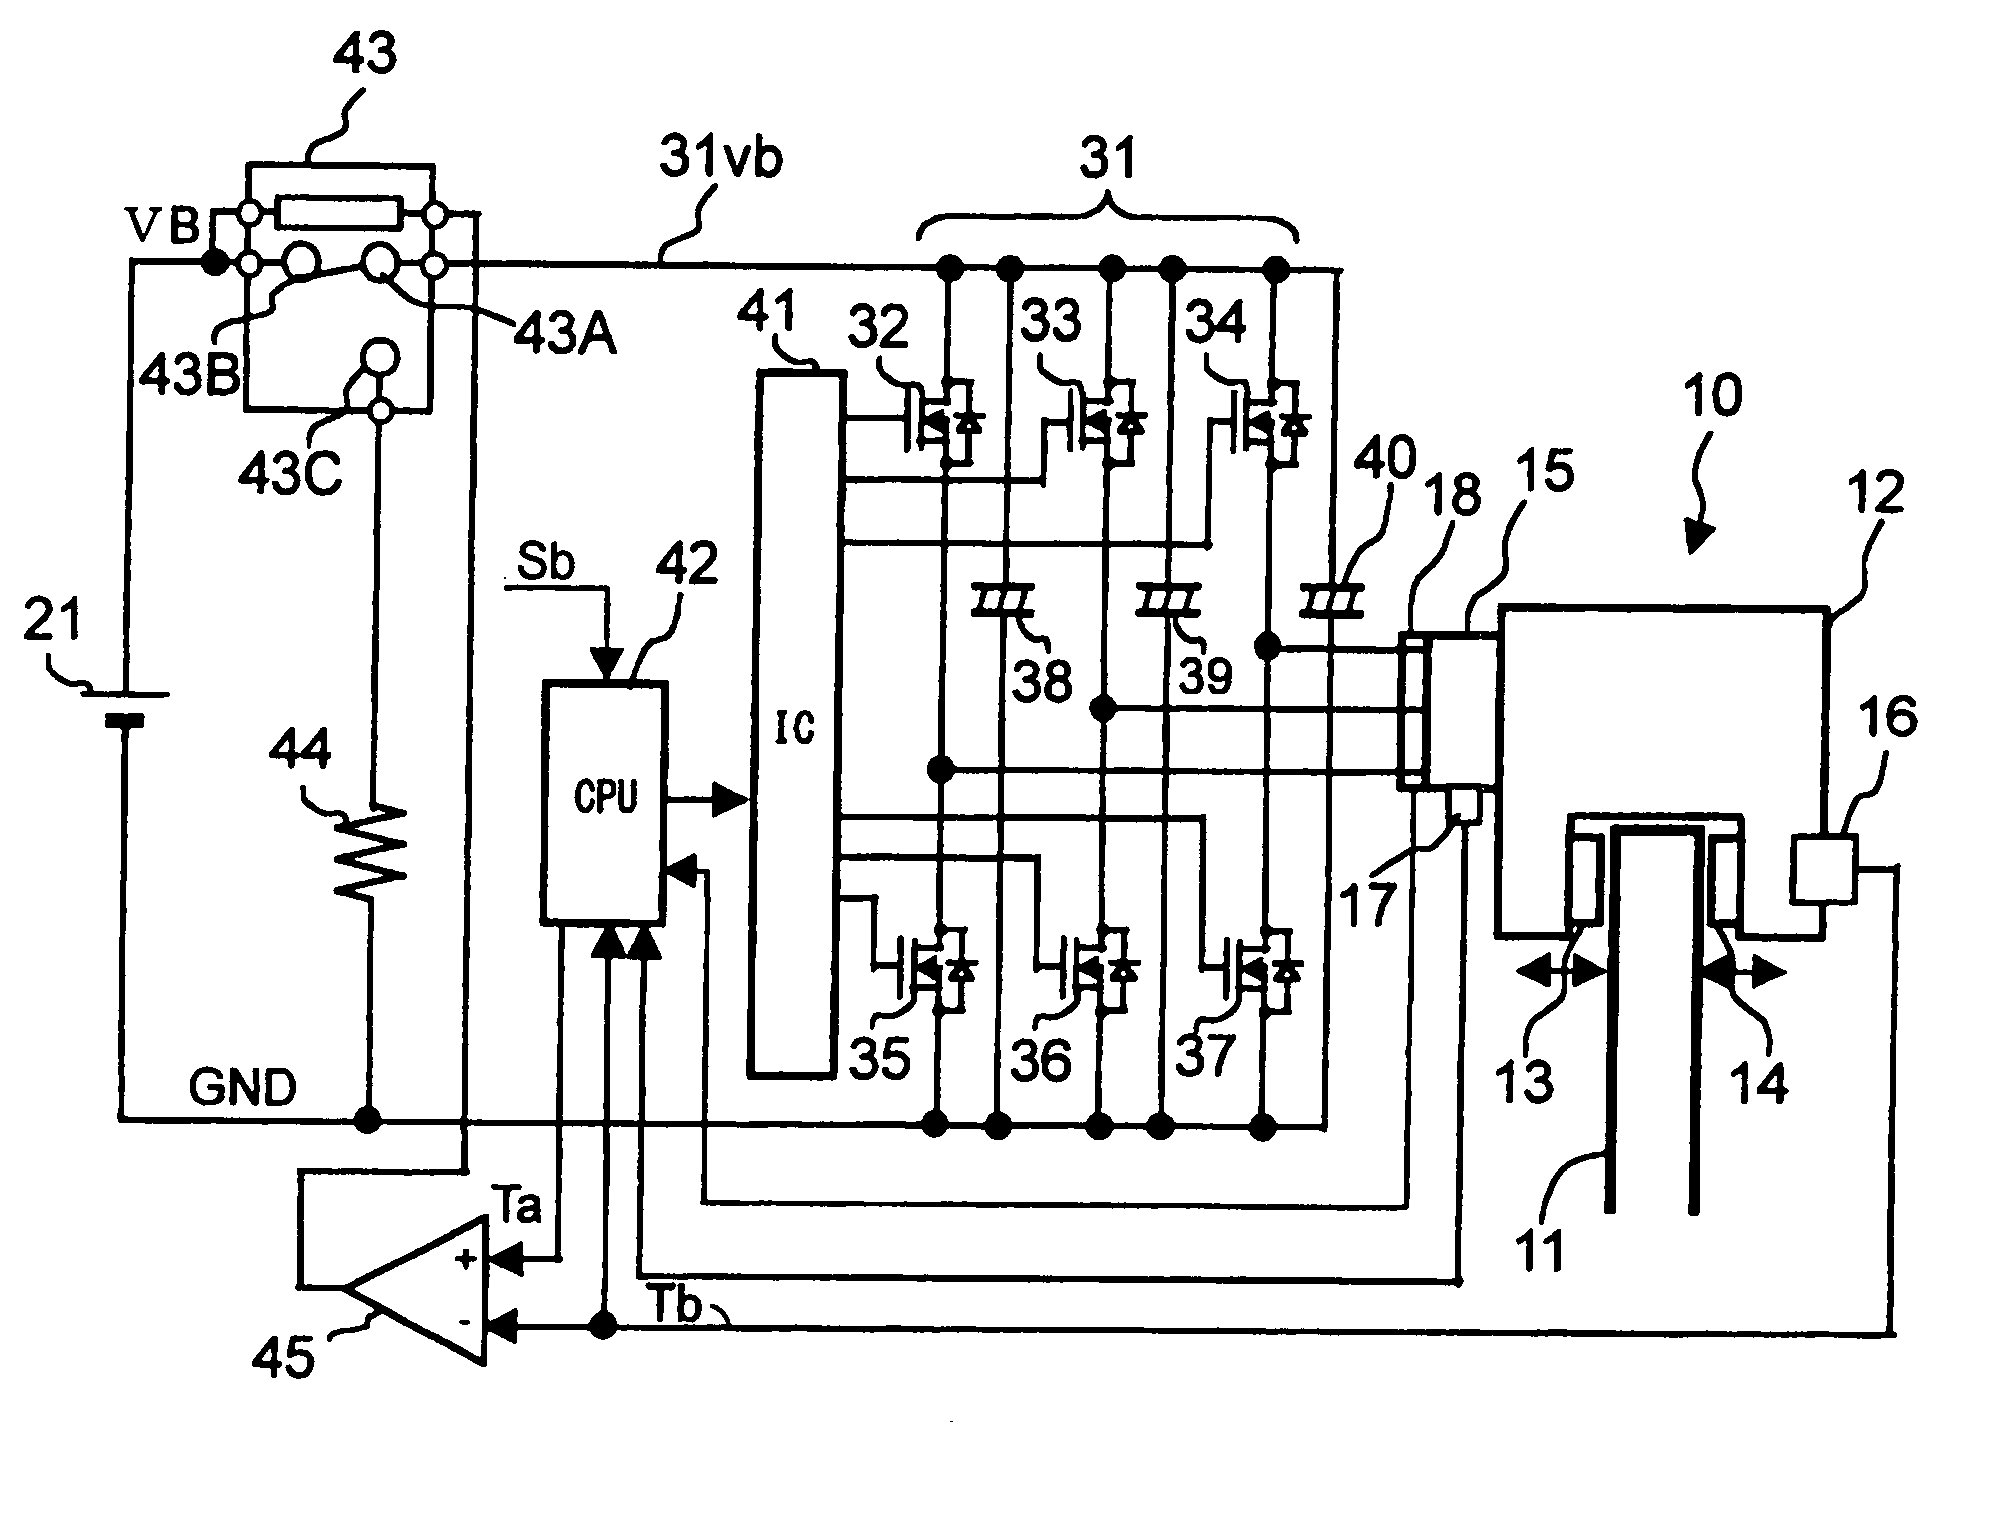 Control apparatus for electric motor of inverter system and control apparatus for electro mechanical brake